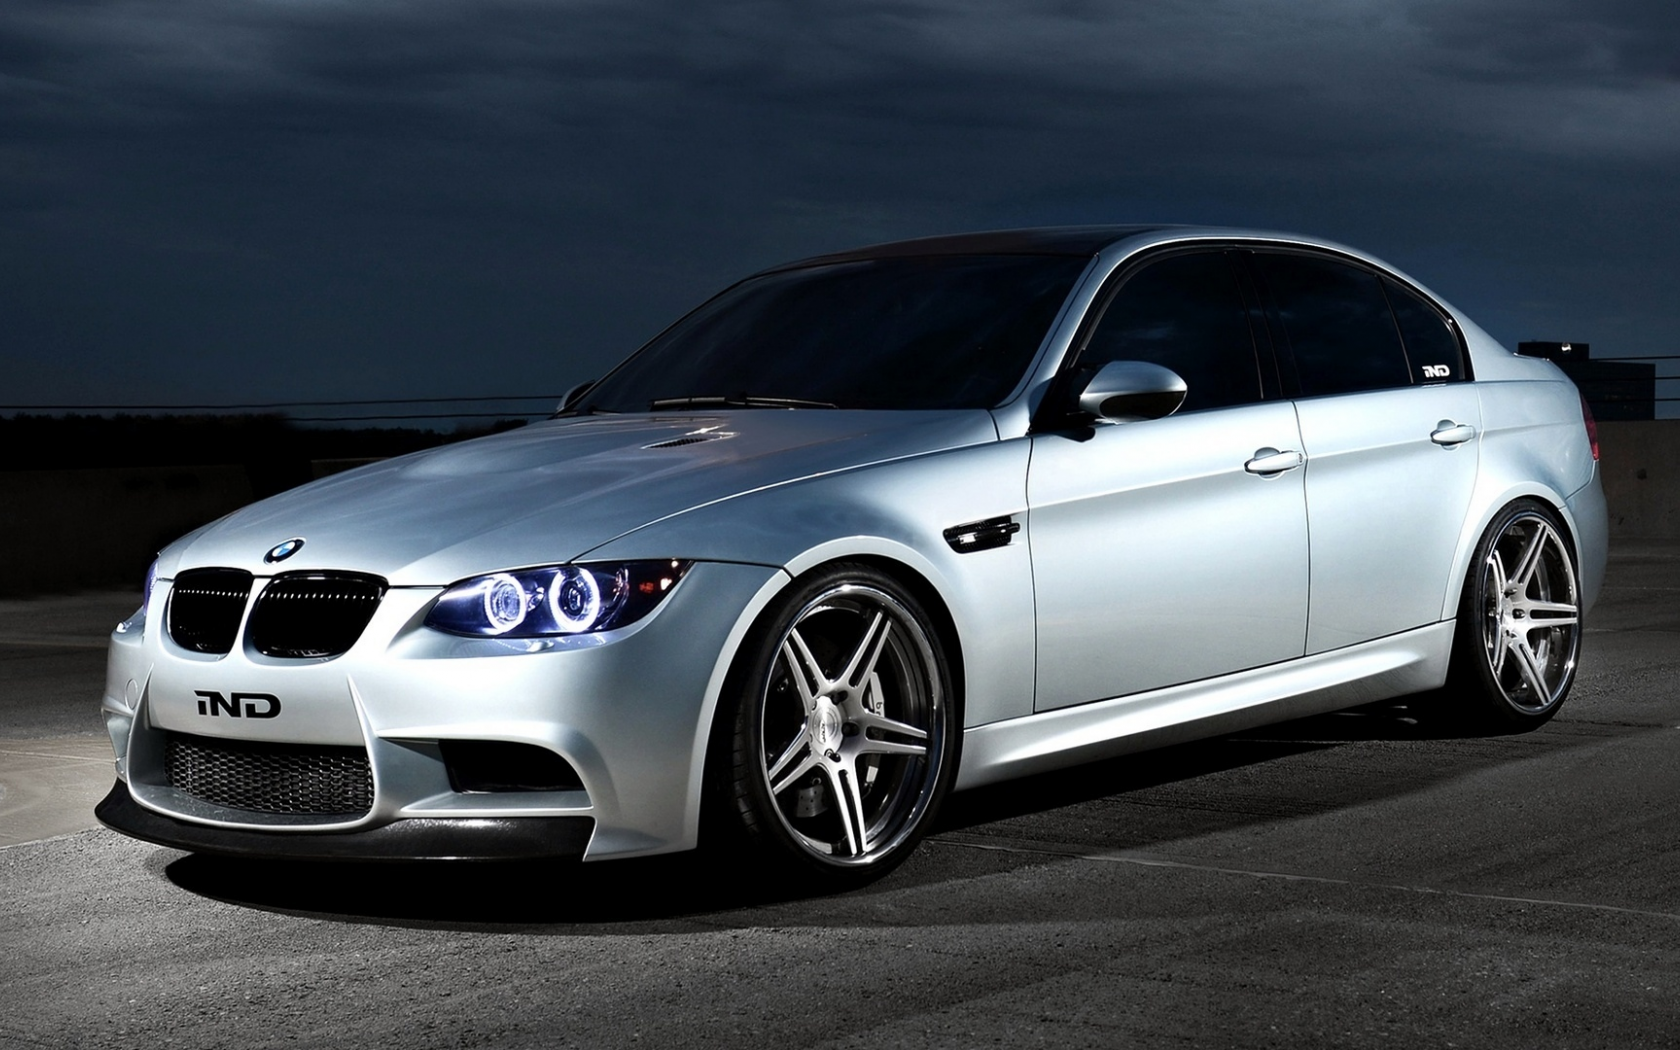 silver, tuning, ghost, Car, sedan, e90, angel eyes, automobile, wallpapers, bmw m3, 2012, ind